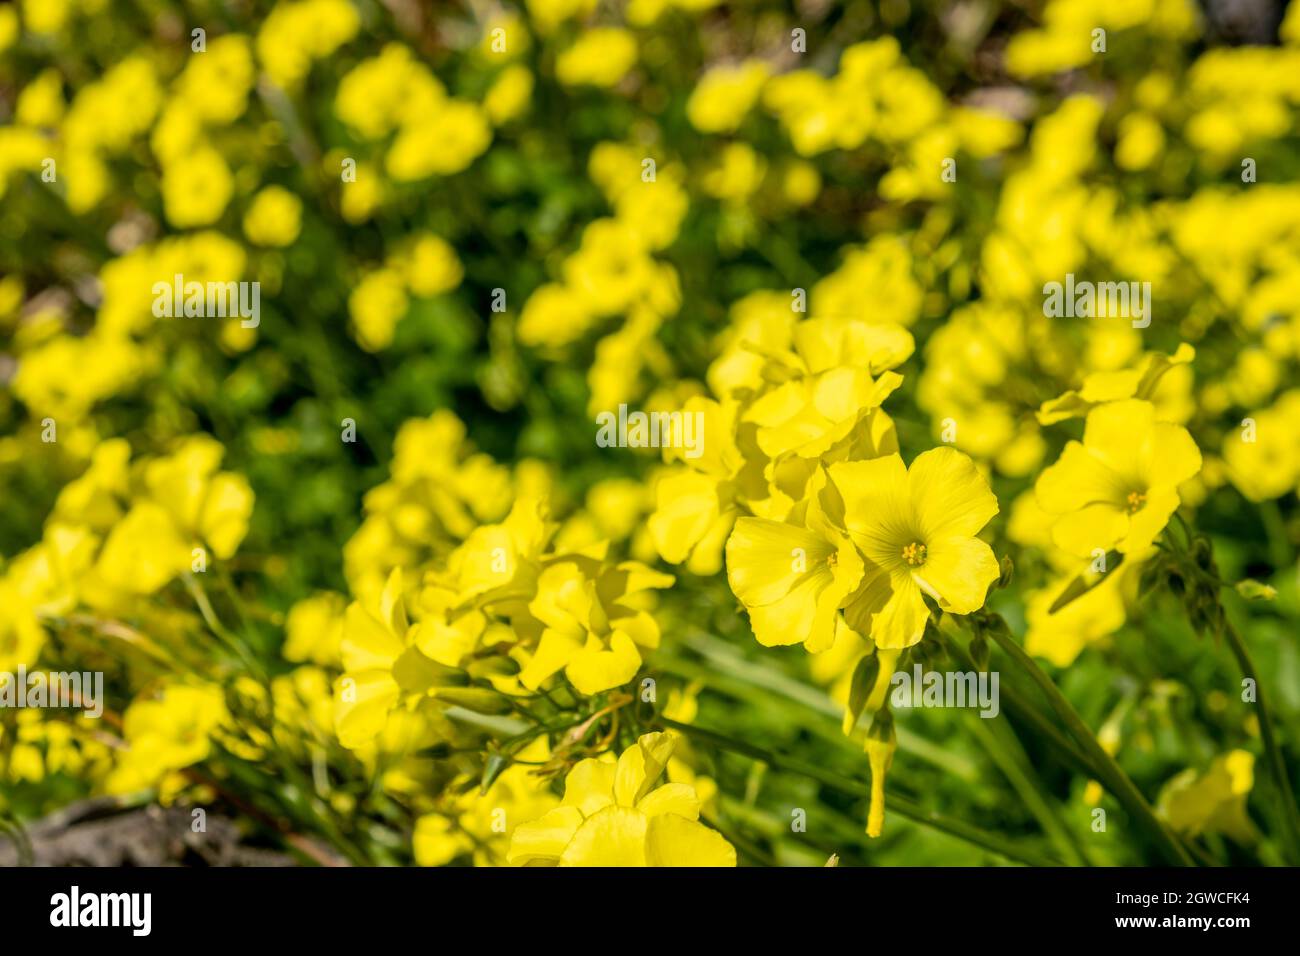 Beautiful Yellow Flowers In A Field Under Bright Sunlight - Shallow Focus Stock Photo